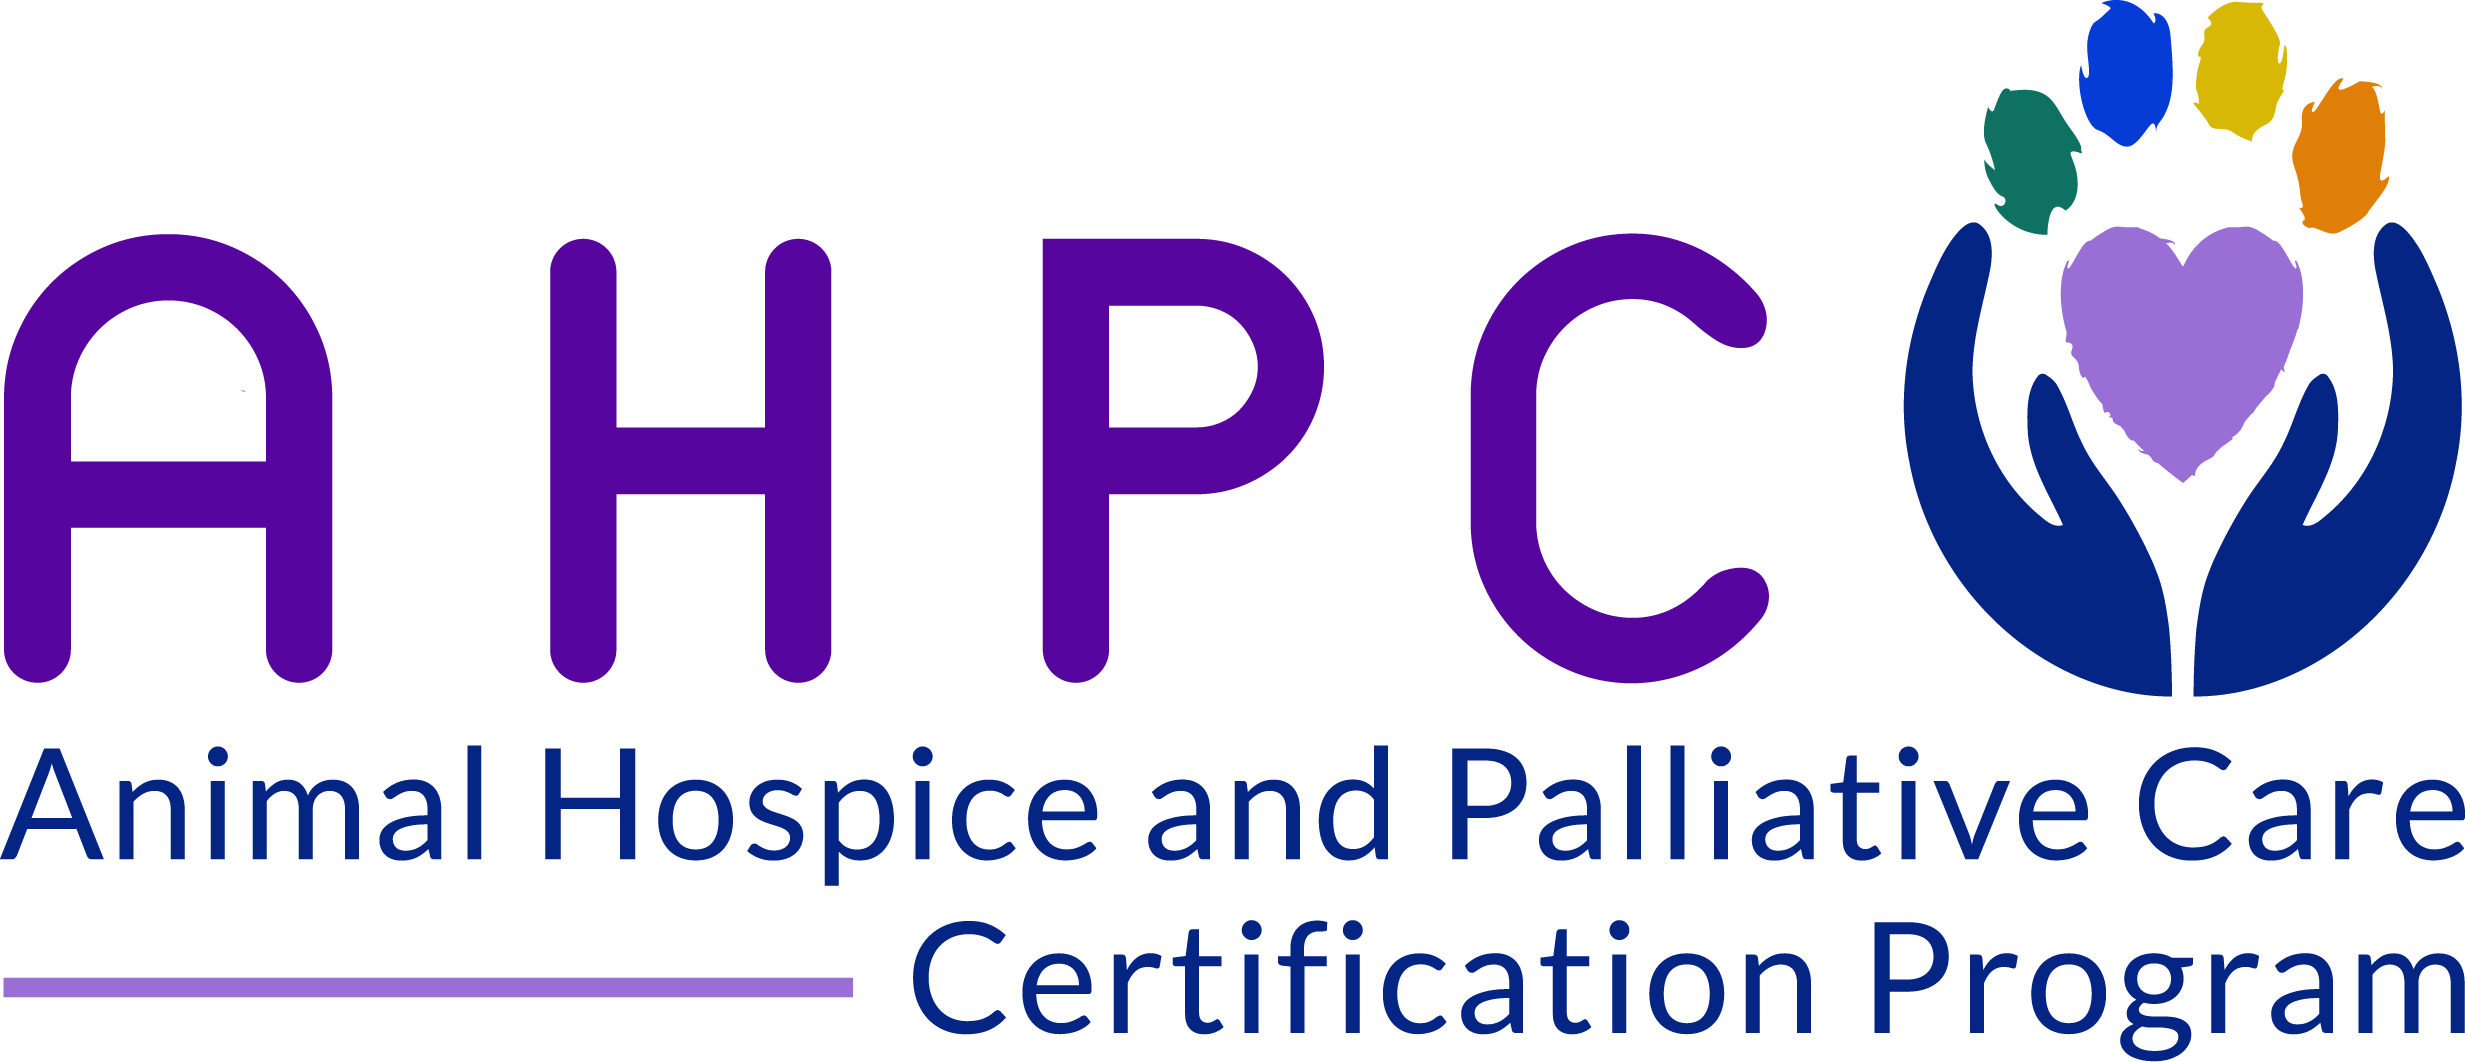 Animal Hospice and Palliative Care Certification